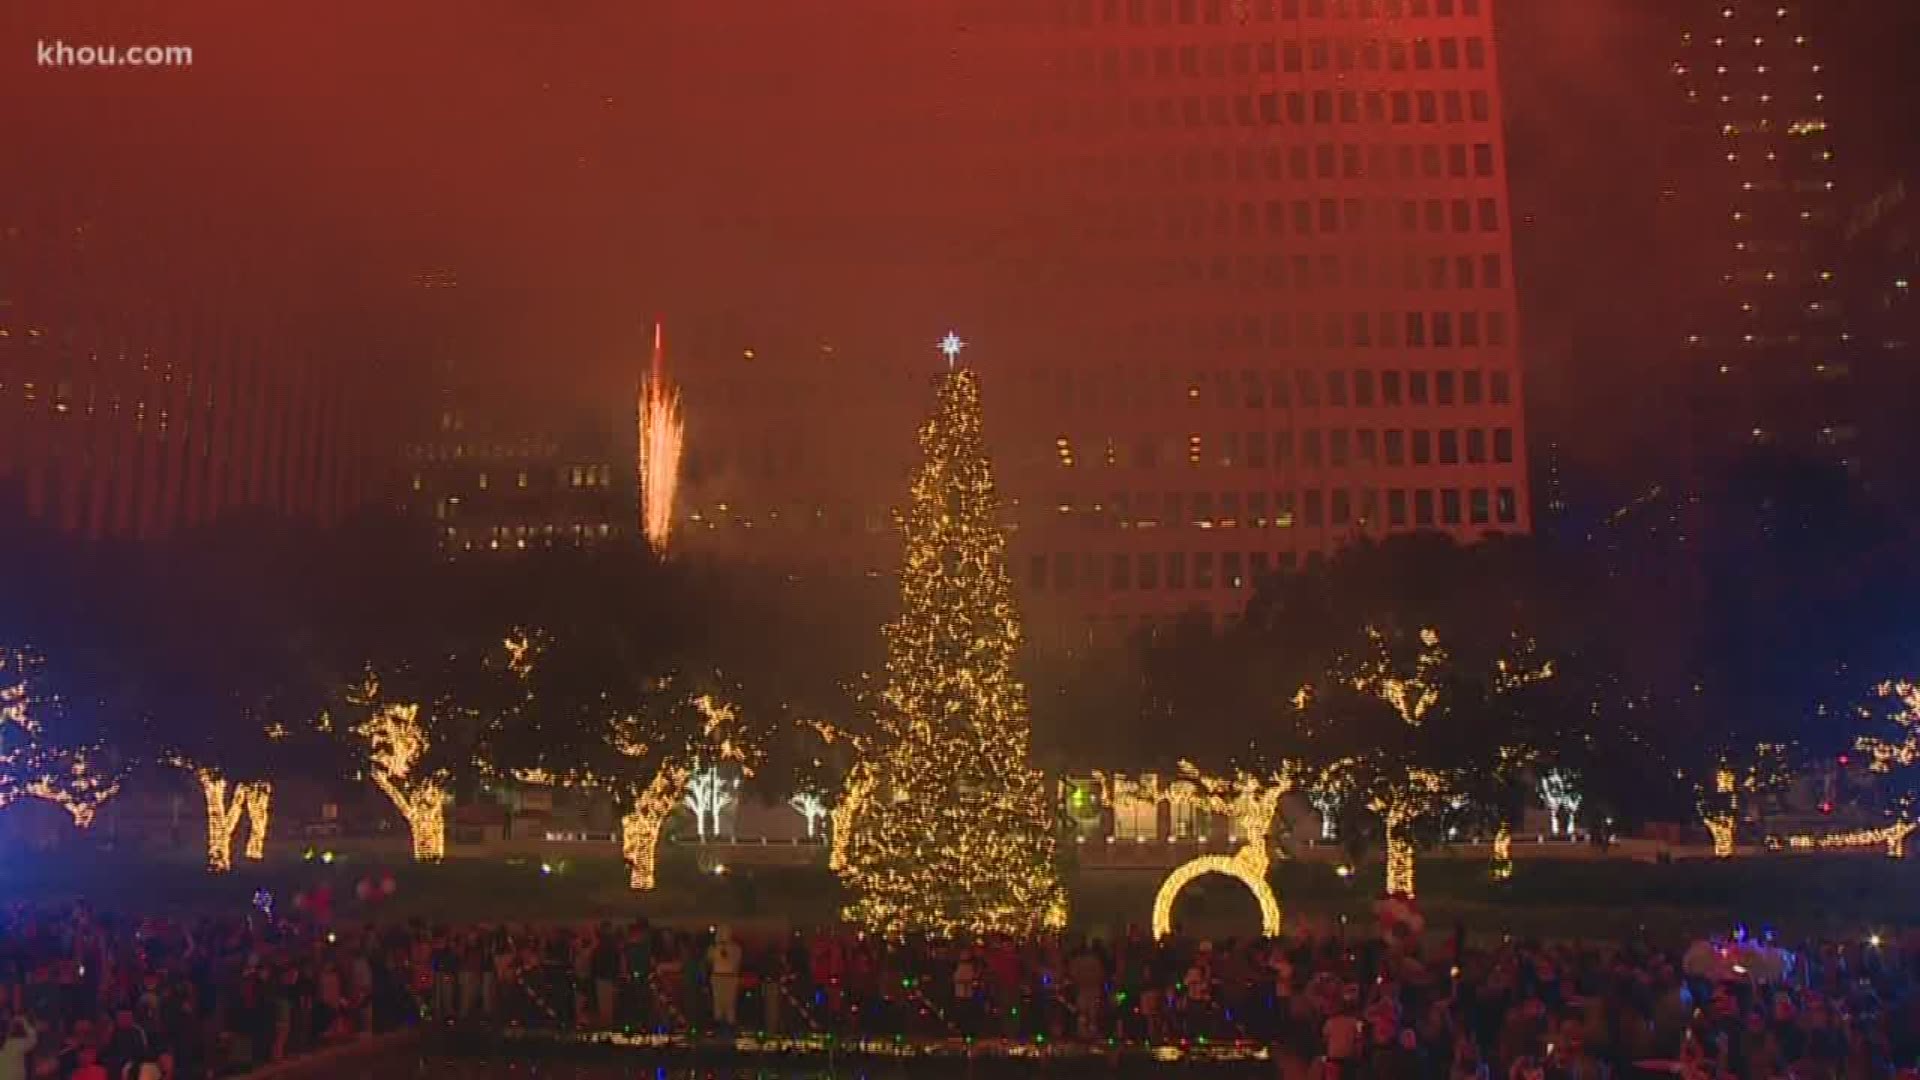 The City of Houston marked 100 years of it's annual tree lighting ceremony with Reliant Lights Mayor's Holiday Spectacular on Saturday.